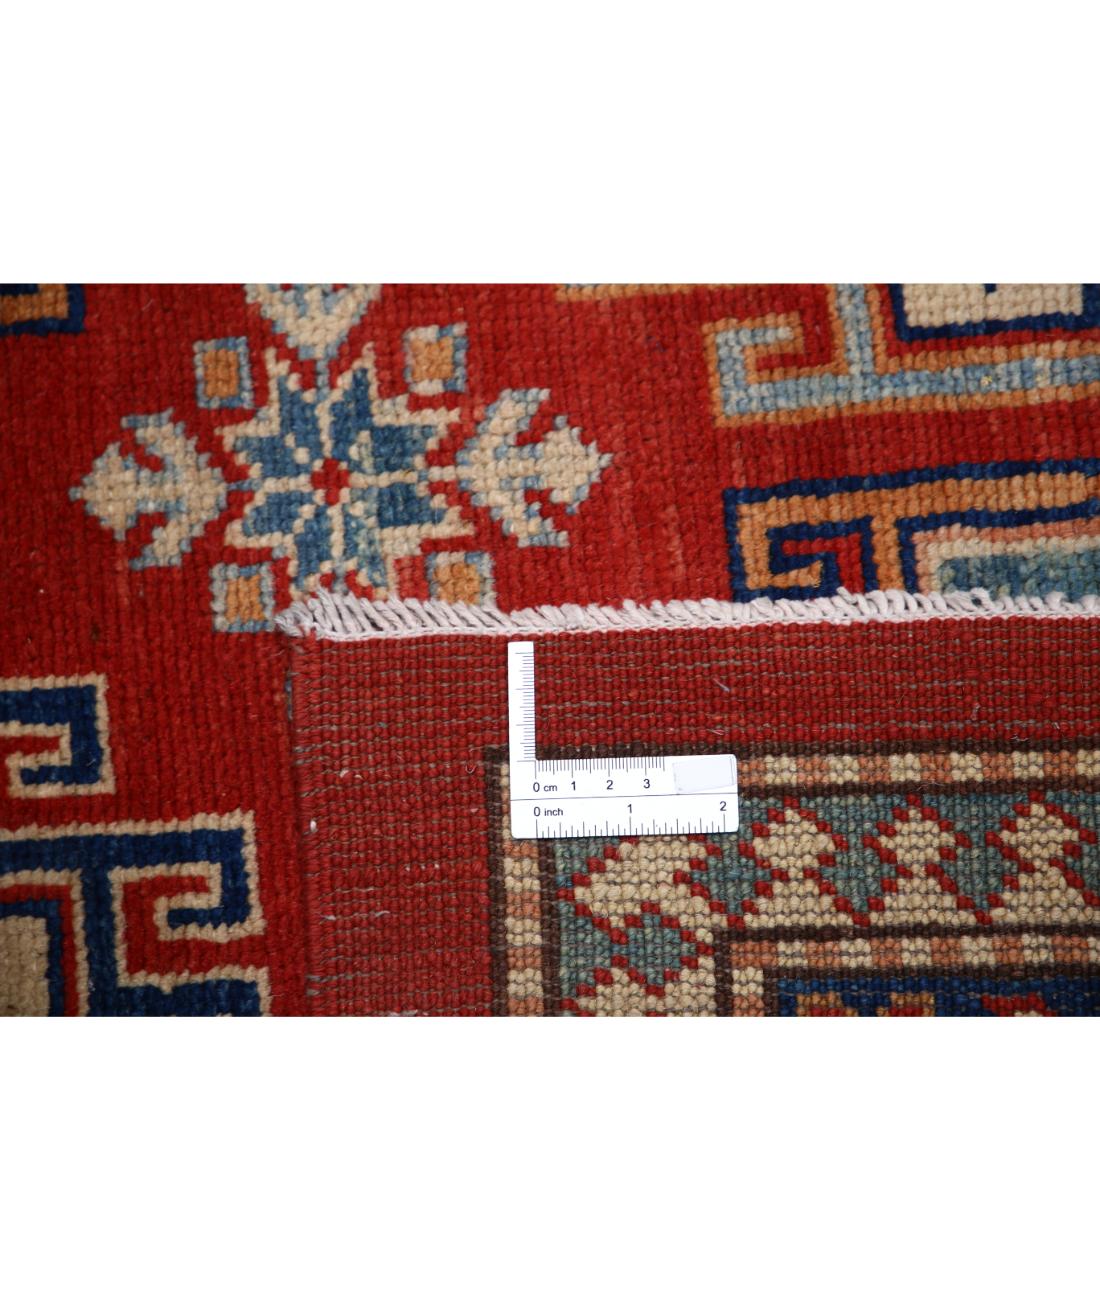 Hand Knotted Tribal Kazak Wool Rug - 8'2'' x 11'3'' 8' 2" X 11' 3" (249 X 343) / Red / Ivory